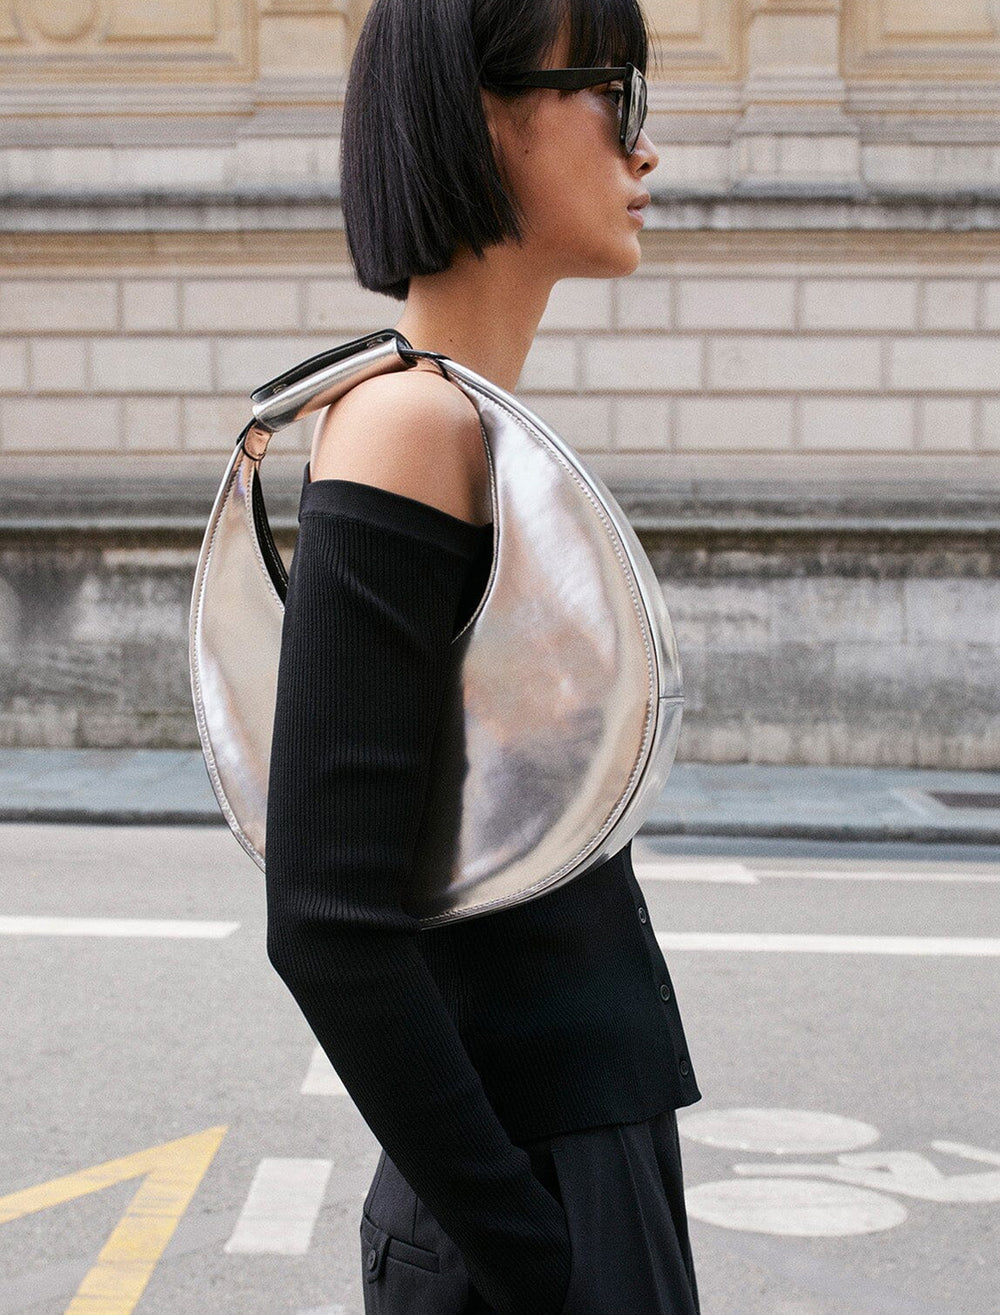 Model wearing STAUD's moon tote bag in chrome on her shoulder.